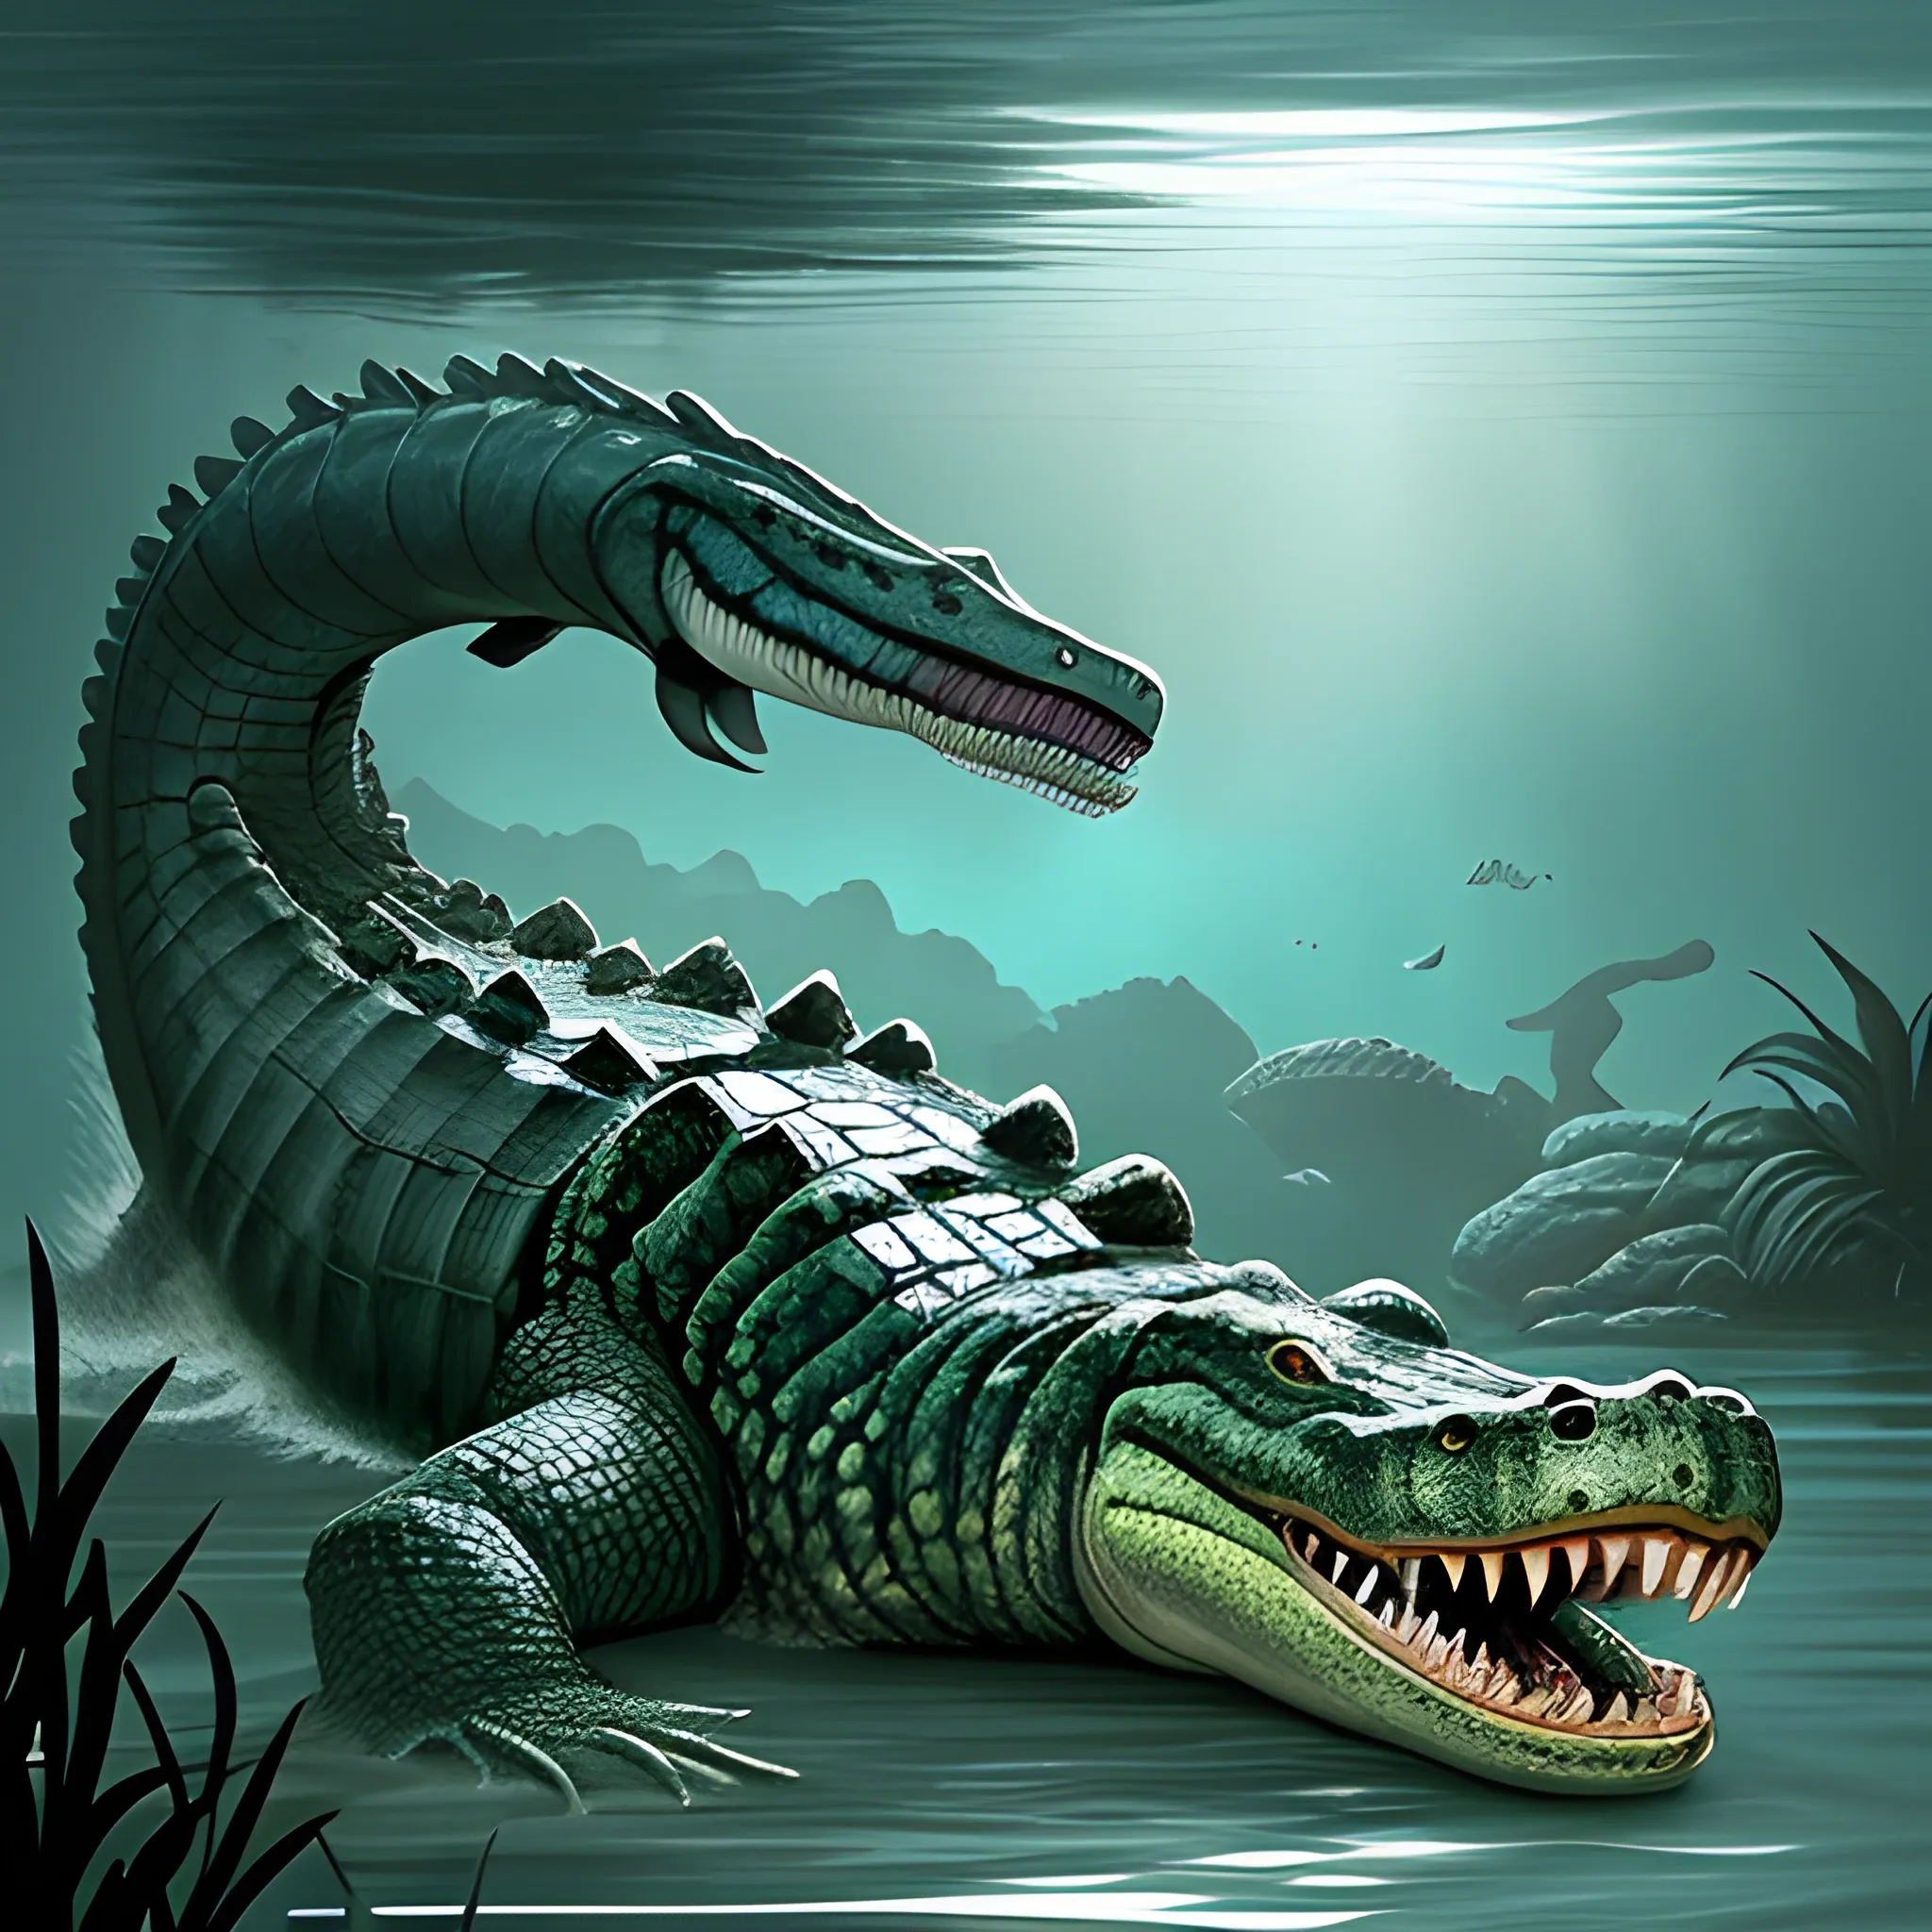 Appearance: The Giant Crocodile is an enormous and monstrous reptile, dwarfing its smaller counterpart in size and power. It has a massive body covered in thick and rugged scales that can range from dark greens to deep browns, perfectly camouflaging it in its aquatic habitat. Its long and powerful tail serves as a formidable weapon, enabling it to swim swiftly and strike with devastating force. The Giant Crocodile's eyes gleam with an intelligence and predatory instinct that sets it apart from ordinary creatures.

Features: The Giant Crocodile is a colossal apex predator, boasting immense strength and resilience. Its jaws are filled with rows of sharp teeth, capable of crushing bones and armor with ease. Unlike its smaller kin, the Giant Crocodile is fully adapted for a purely aquatic lifestyle, rarely venturing onto land except to bask in the sun or establish dominance in its territory.

Habitat: Giant Crocodiles prefer large bodies of freshwater, such as expansive rivers, deep lakes, and marshlands. They are territorial creatures, claiming vast stretches of water as their hunting grounds. In your DND world, they could inhabit mysterious swamps or hidden lagoons, guarding ancient secrets or treasures.

Behavior: As ambush predators, Giant Crocodiles are masters of surprise attacks. They remain mostly submerged, with only their eyes and nostrils visible above the water's surface. When potential prey ventures too close, the Giant Crocodile strikes with astonishing speed and strength, dragging victims underwater to drown or consume.

Role in the World: In your DND world, Giant Crocodiles could be legendary creatures, feared and respected by both locals and adventurers alike. They might be considered as guardians of ancient temples or revered as avatars of primordial nature. Druids and rangers might see them as symbols of untamed and primal power.

Encountering a Giant Crocodile in the wild is a dangerous and potentially deadly event for adventurers. Its size and power make it an incredibly challenging opponent, even for a well-prepared party. Players must exercise extreme caution when navigating bodies of water known to be inhabited by Giant Crocodiles, as these creatures can deliver swift and lethal attacks.

The presence of Giant Crocodiles in your campaign can create an atmosphere of danger and trepidation when exploring swampy and aquatic environments. Players will need to be constantly vigilant and employ strategic thinking to avoid becoming victims of these monstrous reptiles. Crossing waterways or searching for hidden artifacts in areas known to be Giant Crocodile territory can create a sense of high stakes and urgency in your DND world.